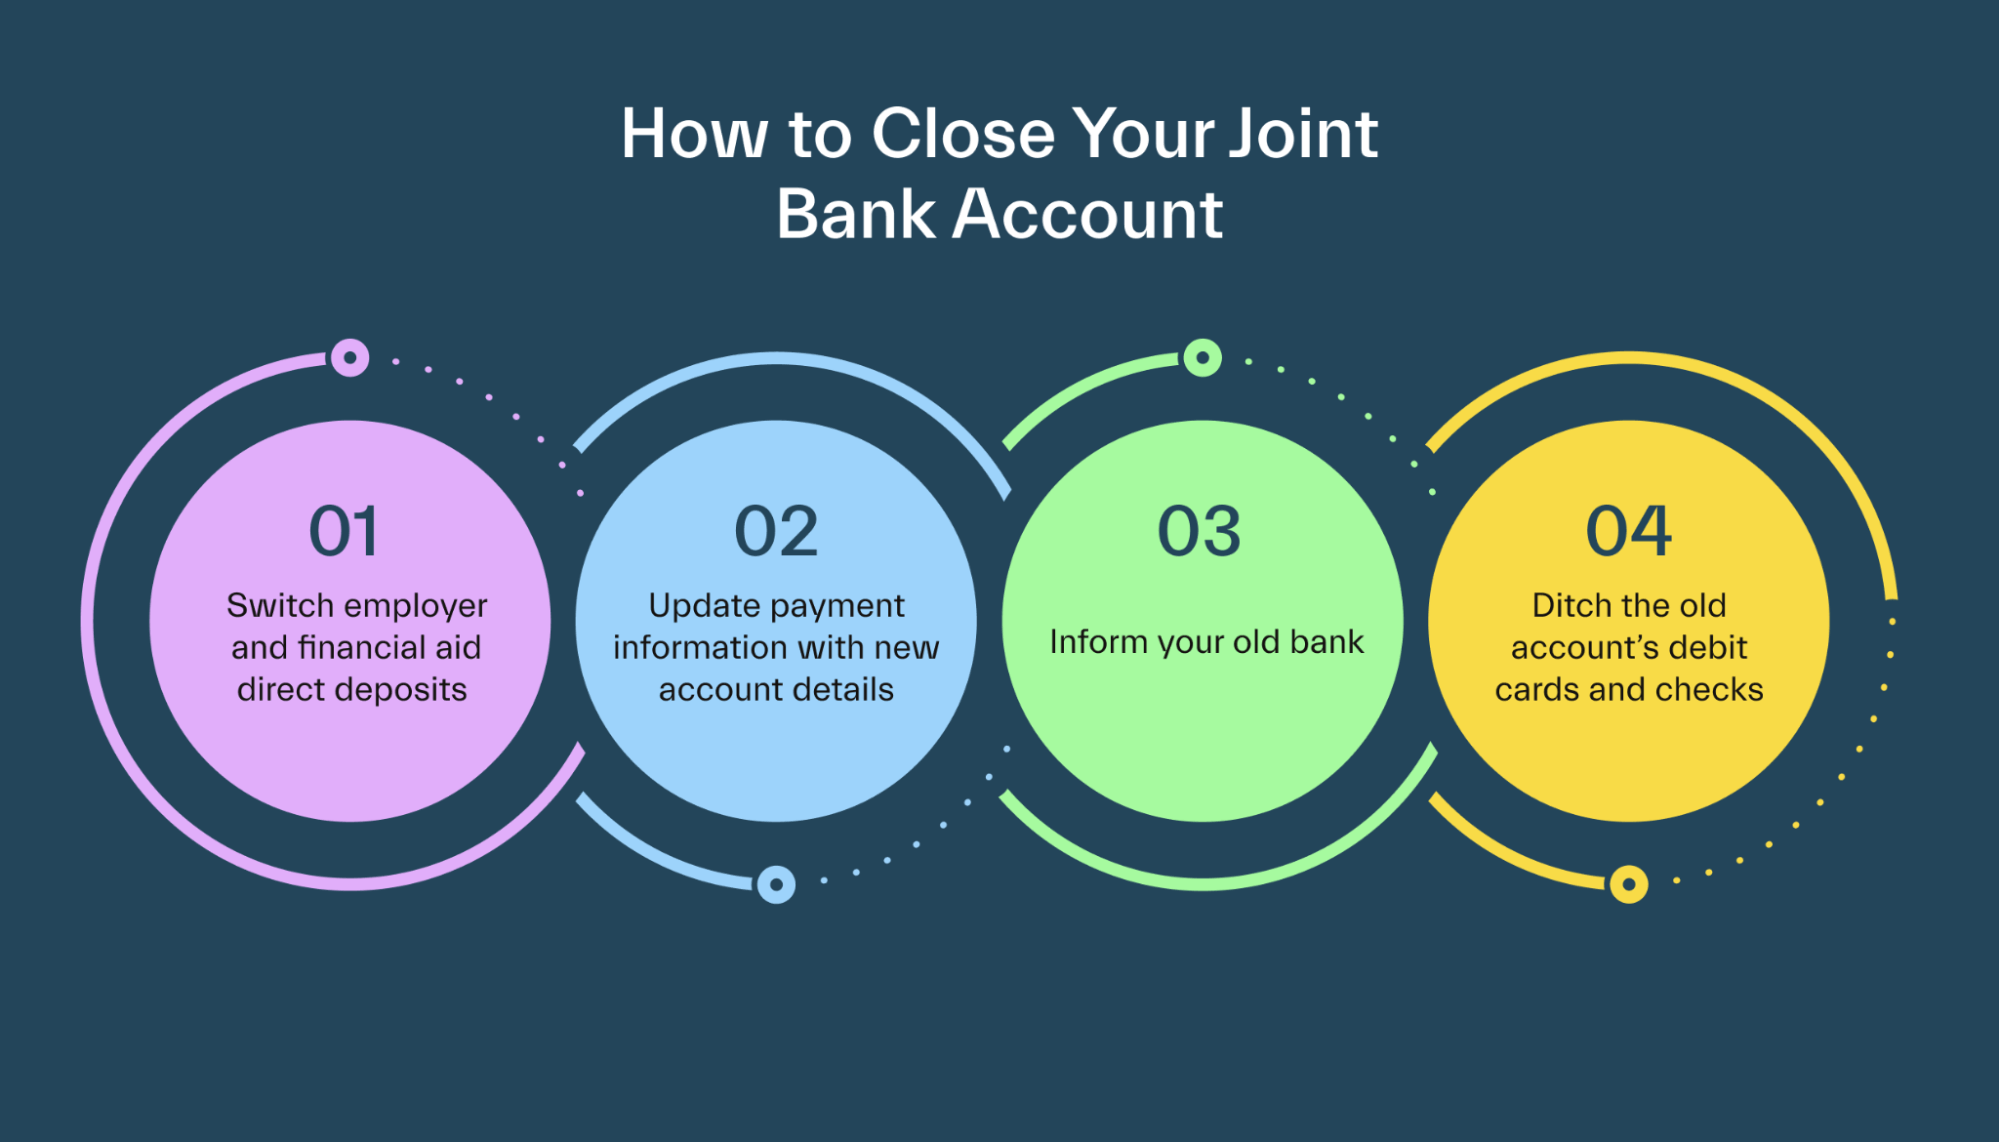 Closing a Joint Account